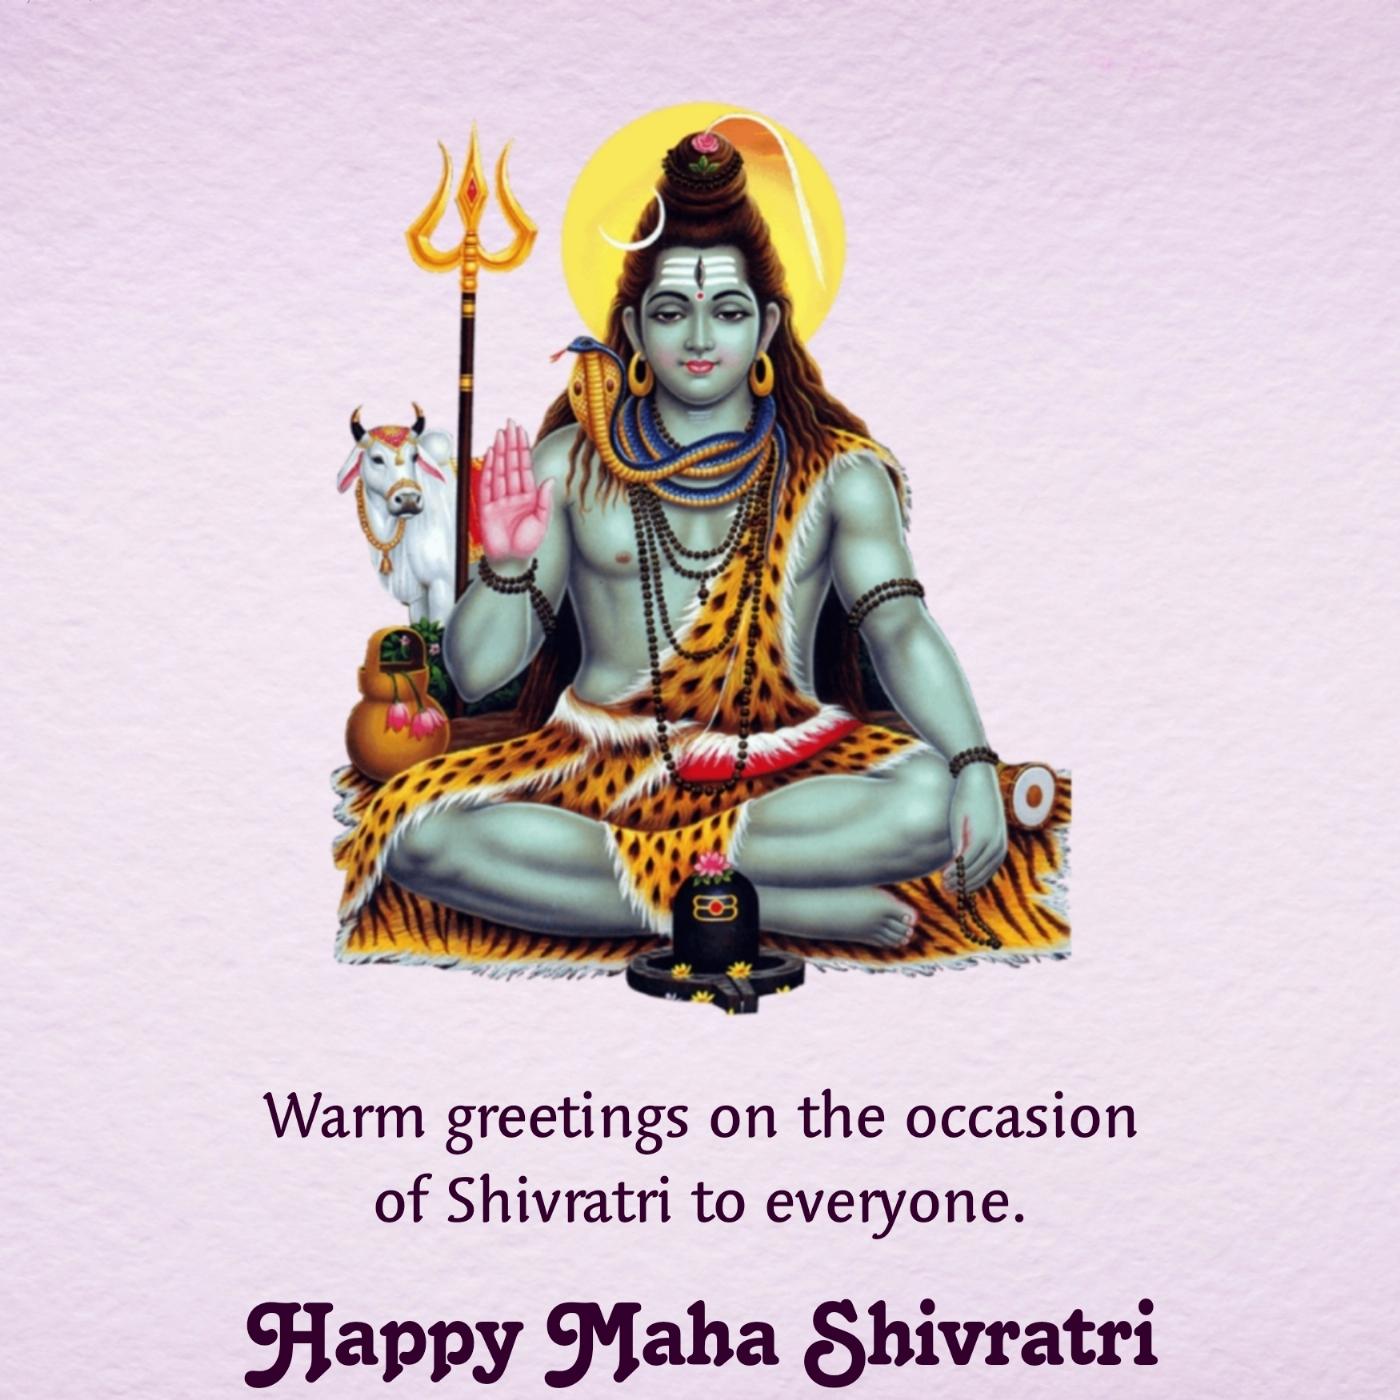 Warm greetings on the occasion of Shivratri to everyone